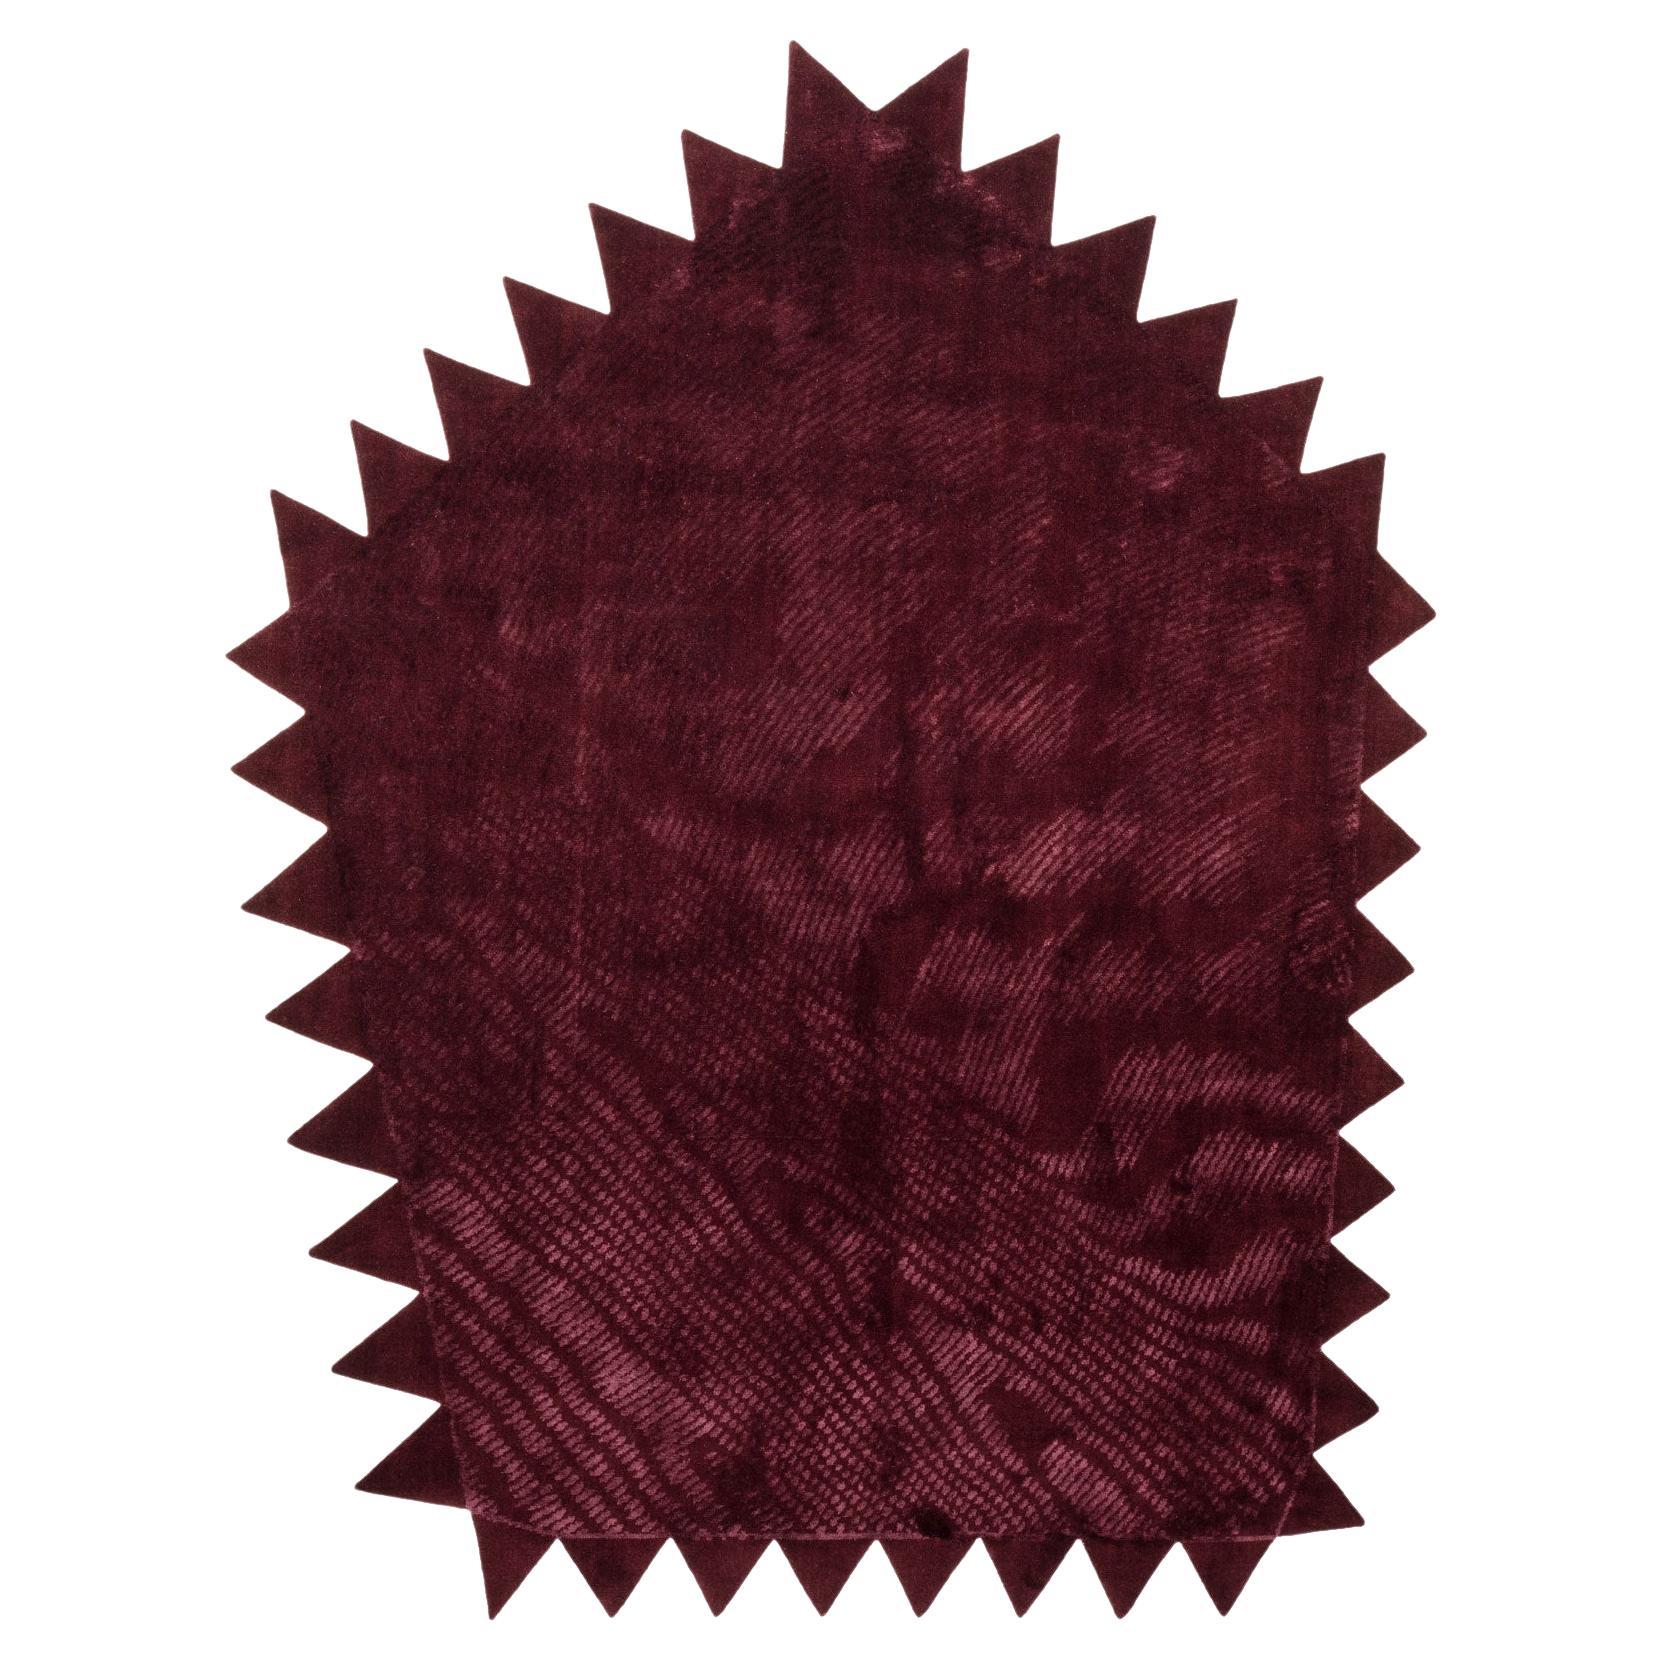 cc-tapis Moire' Collection Zig Zag Burgundy Rug by by Objects of Common Interest